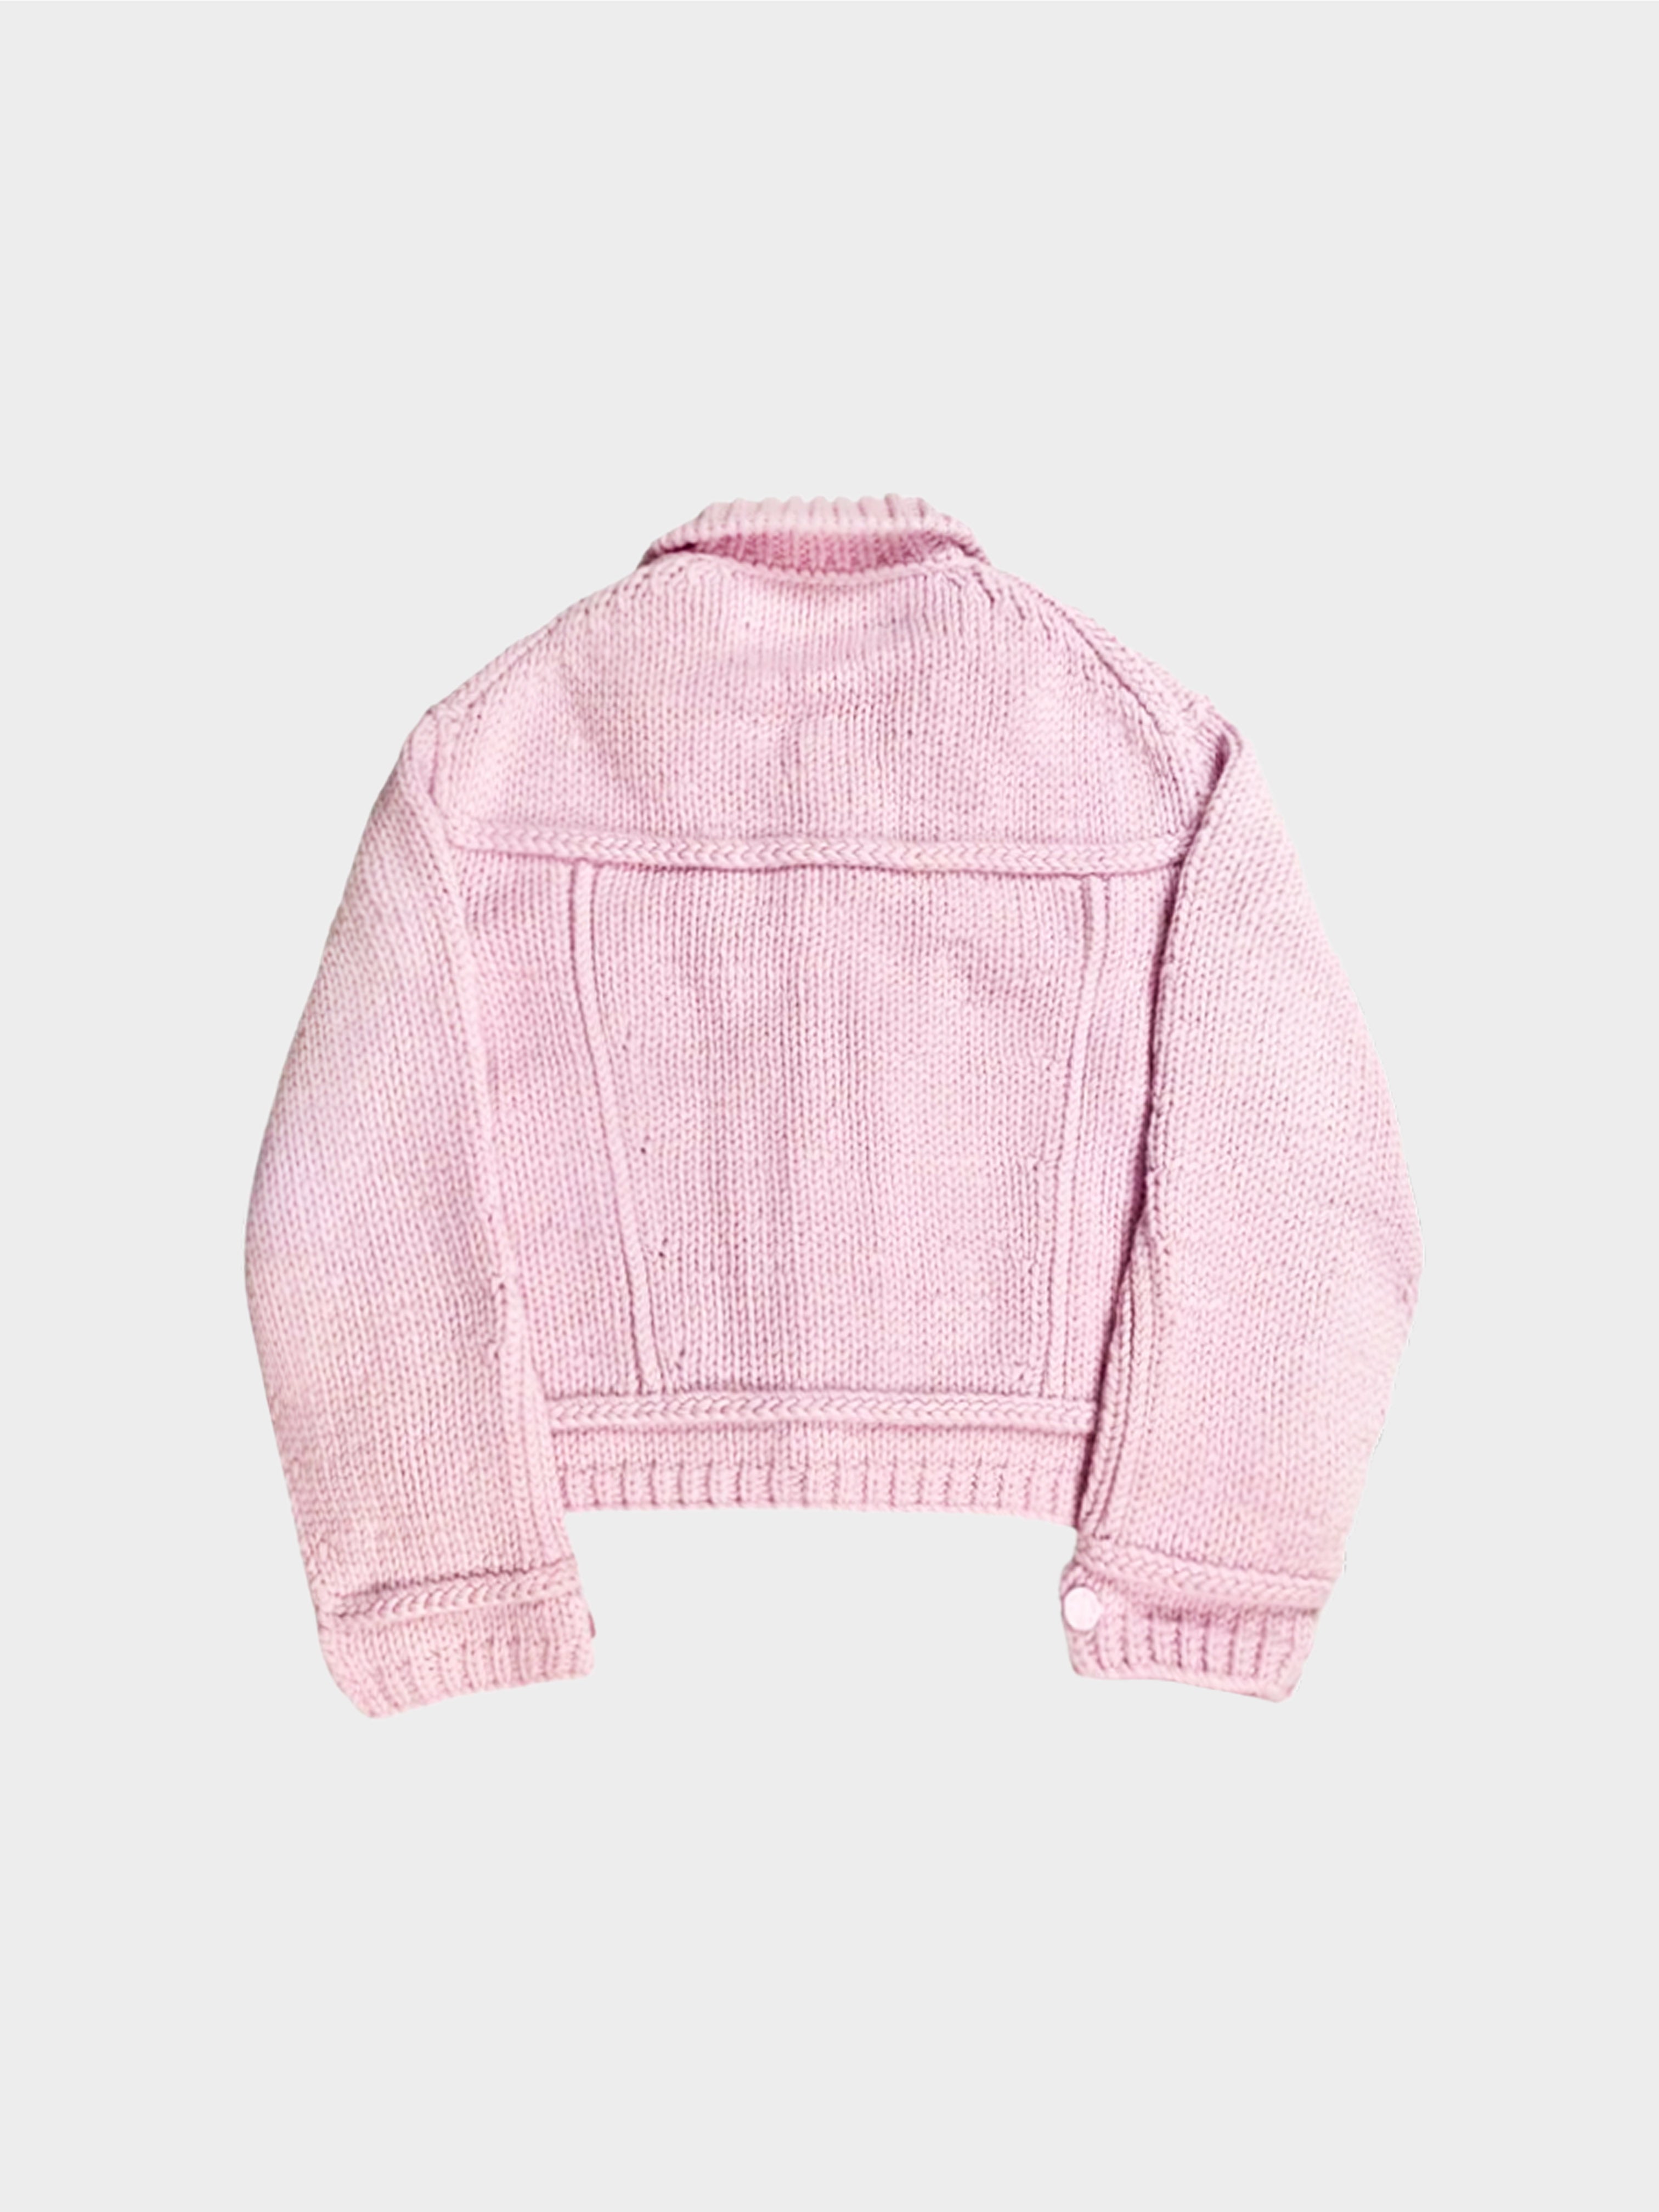 LV SS20 ASIA EXCLUSIVE PINK CHUNKY HEAVY KNIT TRUCKER